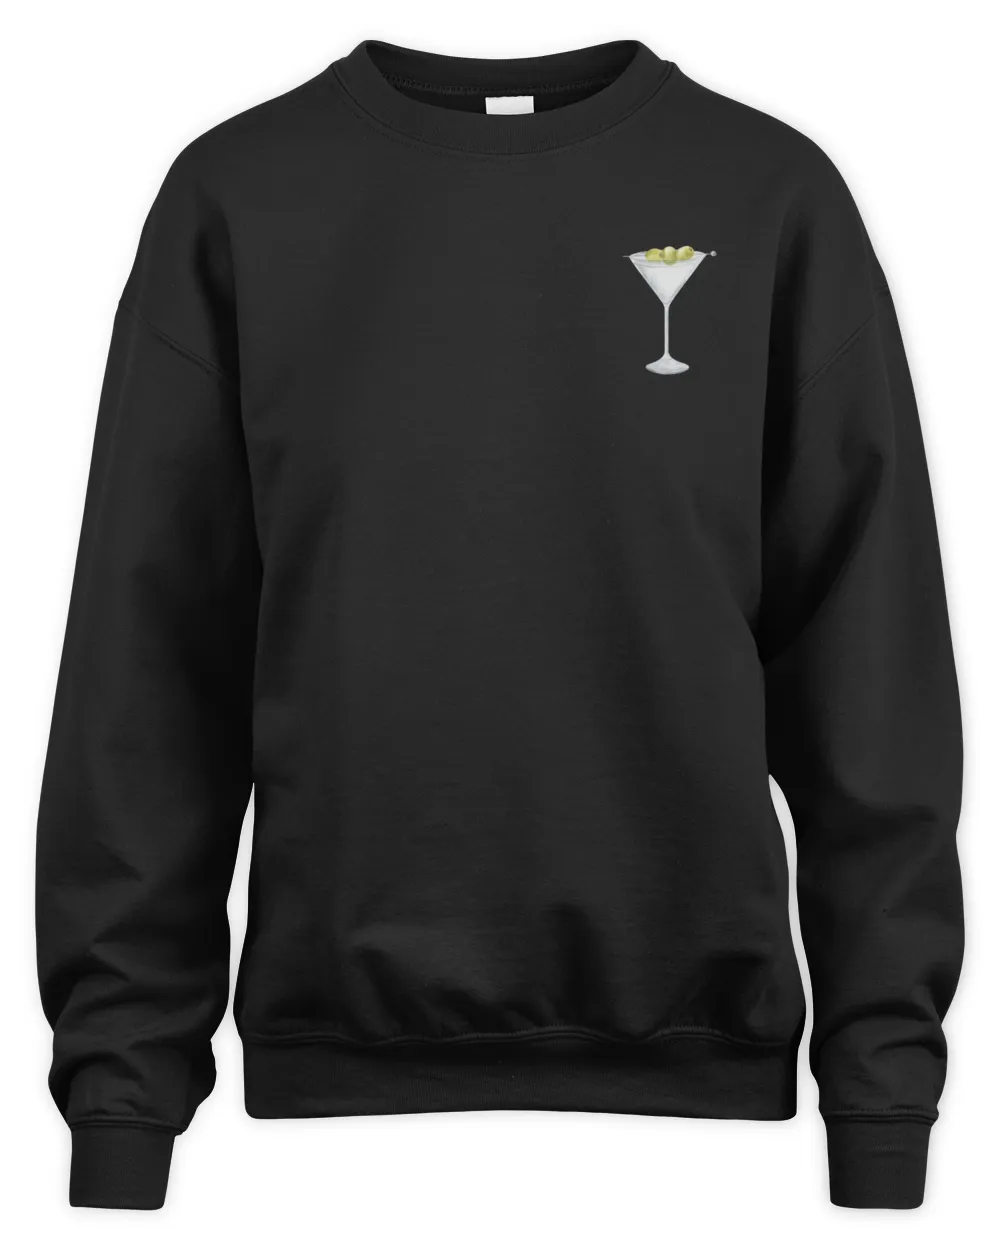 Filthy Martini Sweatshirt, Dirty Martini Lover Gift, Martini Cocktail Pullover, Tini Time Sweater Preppy Crewneck, Gift for Her, Unique Gift